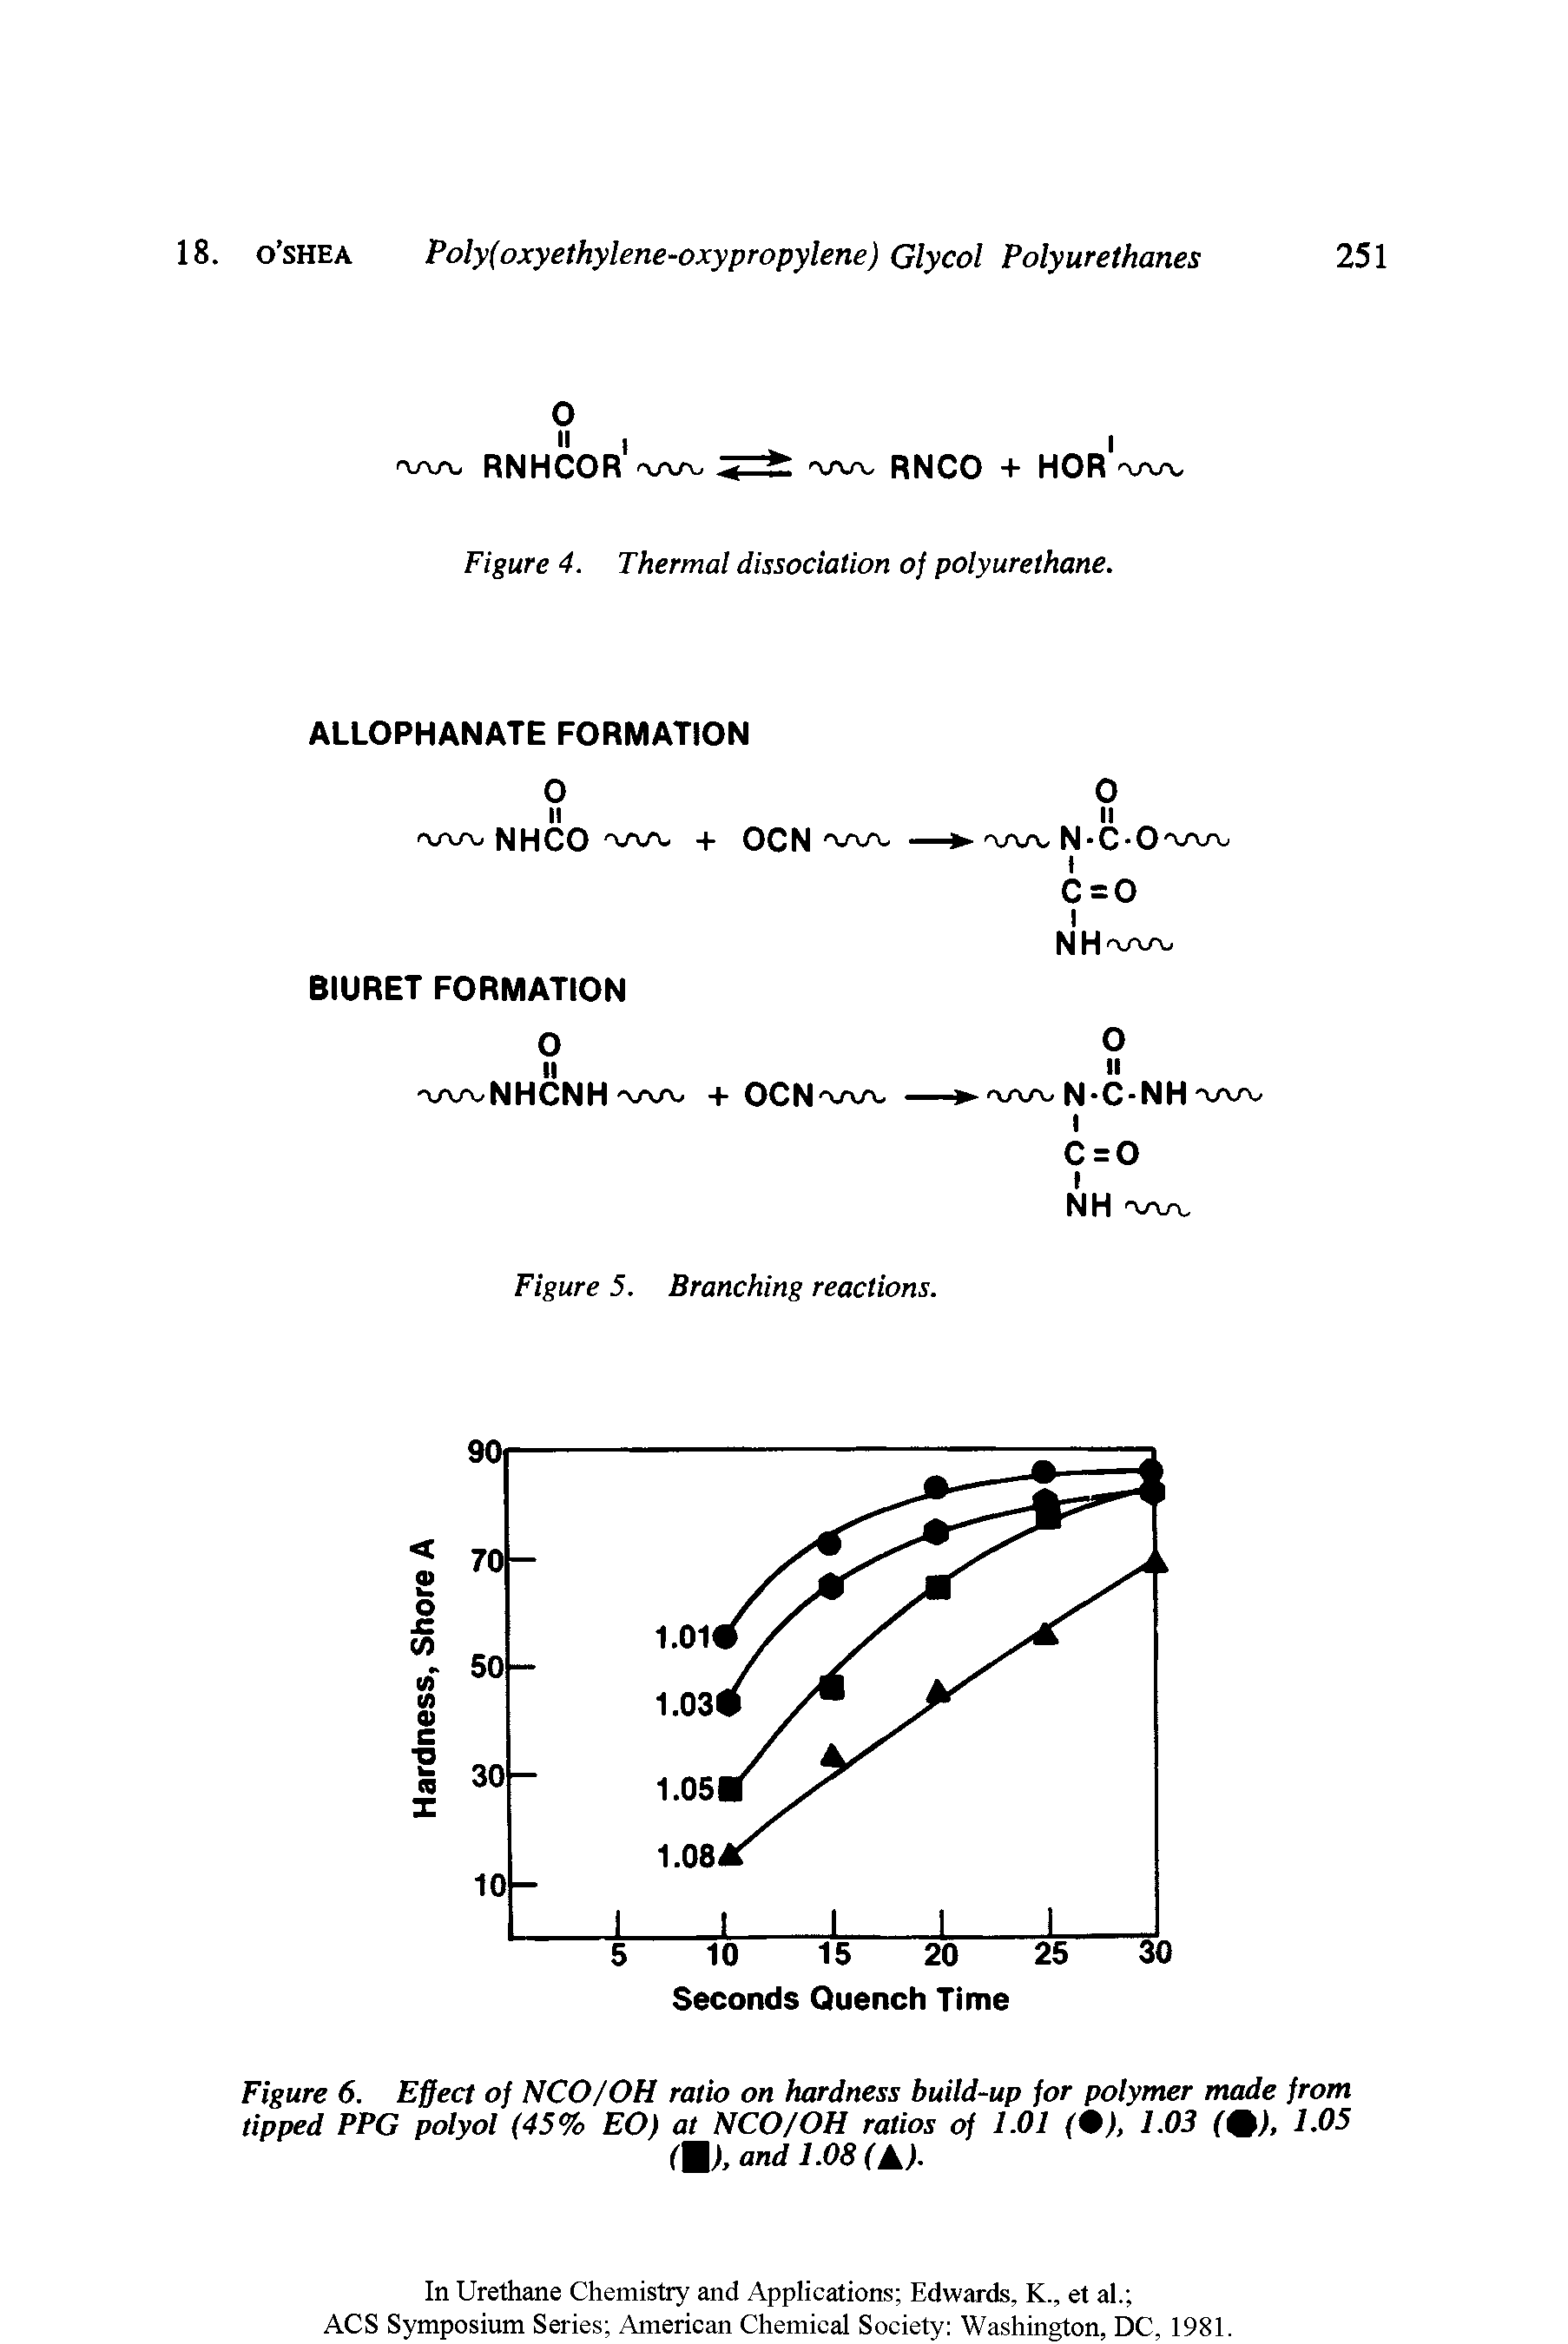 Figure 6. Effect of NCO/OH ratio on hardness build-up for polymer made from tipped PPG polyol (45% EO) at NCO/OH ratios of 1.01 (0), 1.03 (%), 1.05...